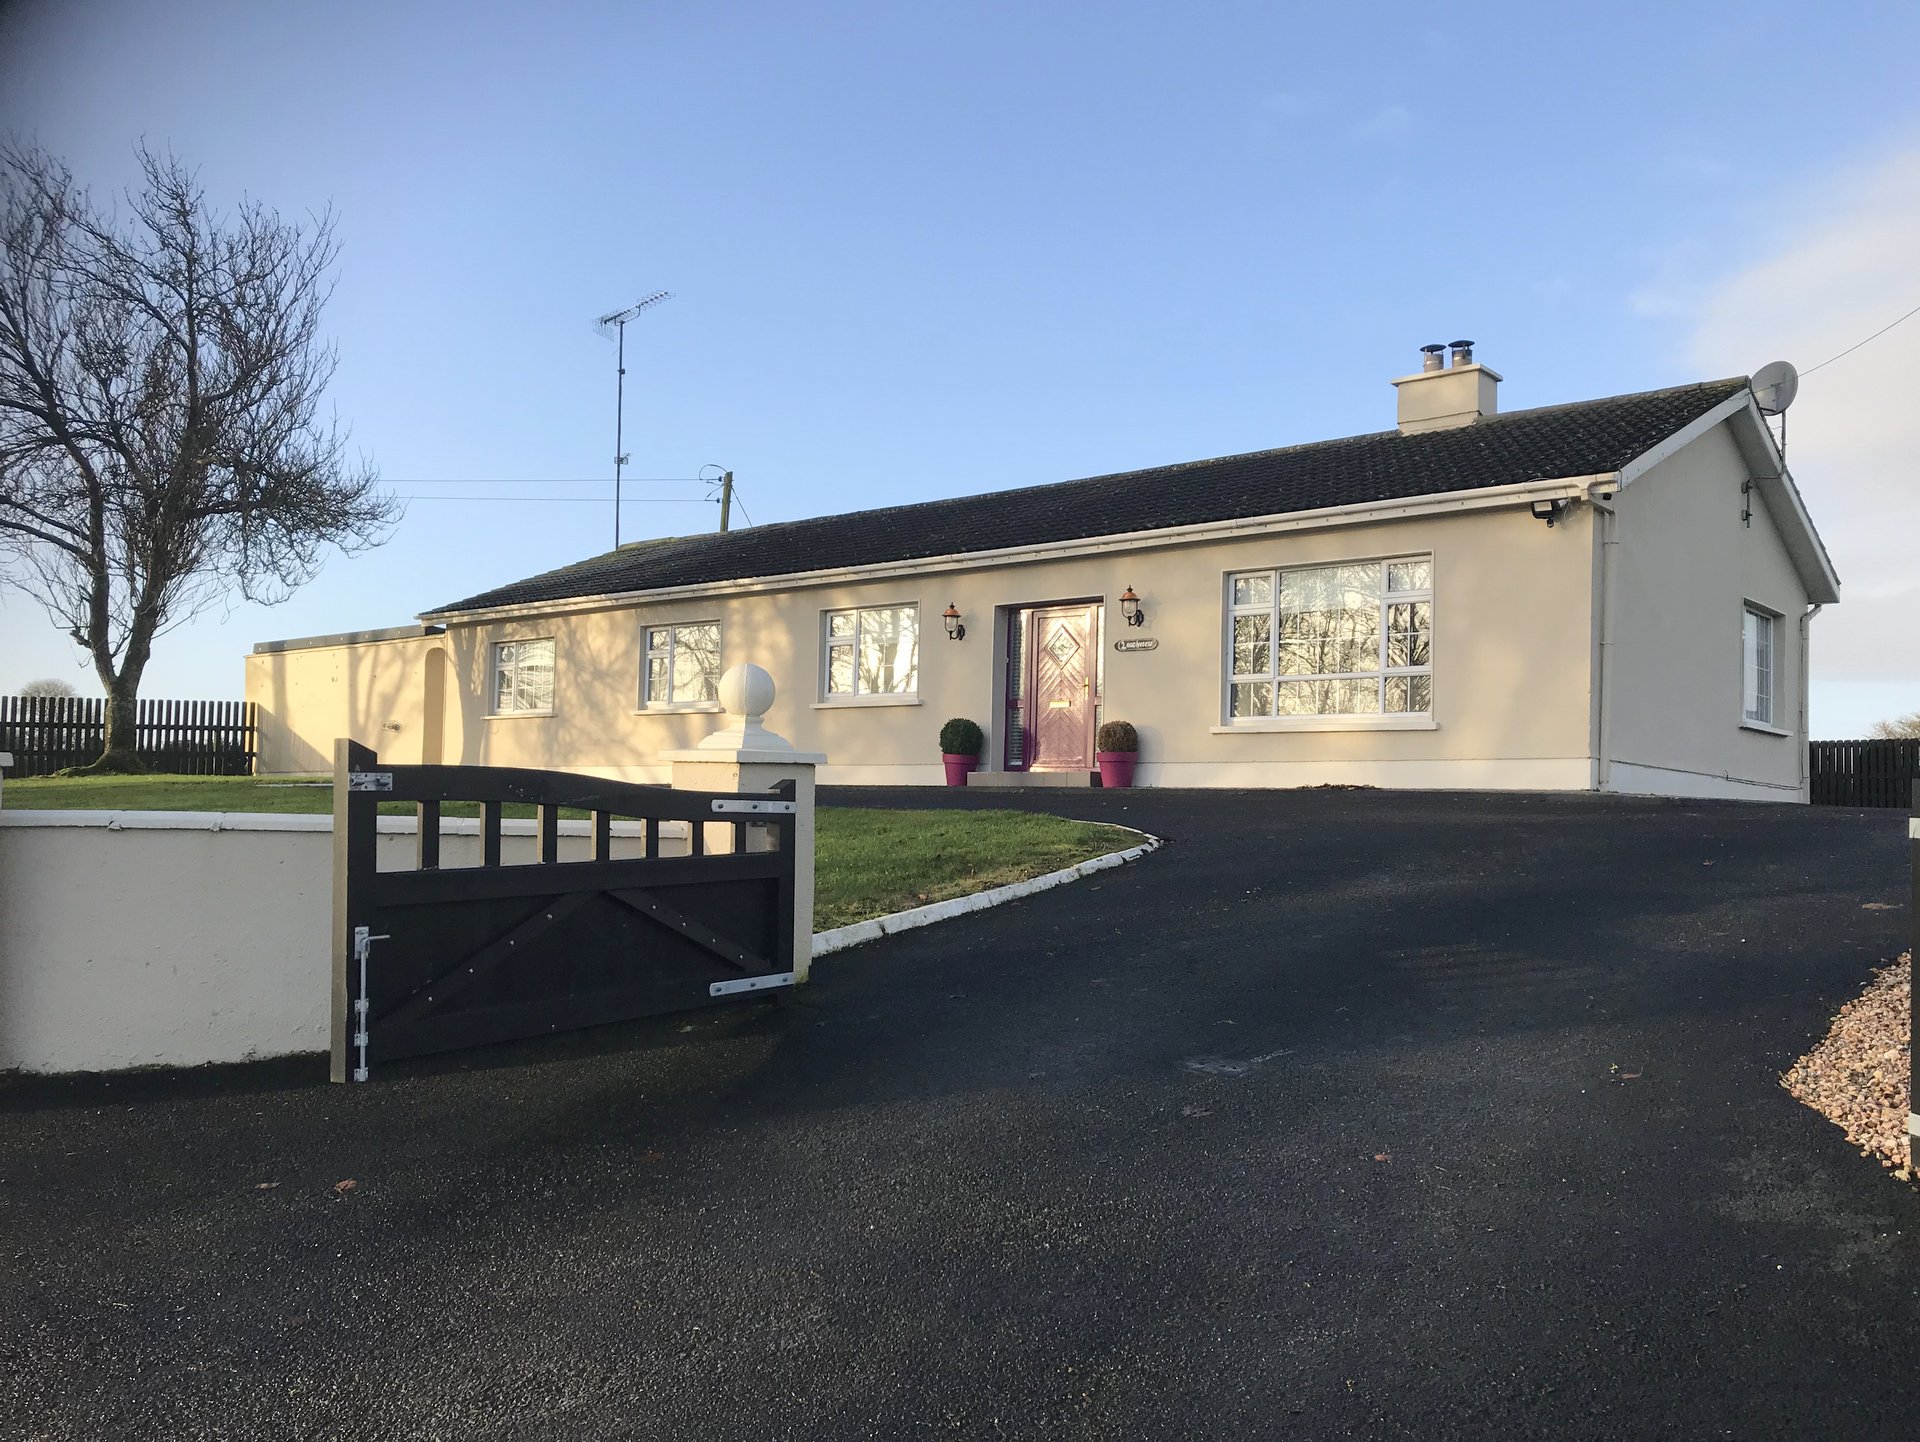 Residential House & c 3.38 Acres @ Loughview, Curnalee, Curraghboy, Athlone, Co Roscommon N37 XE06